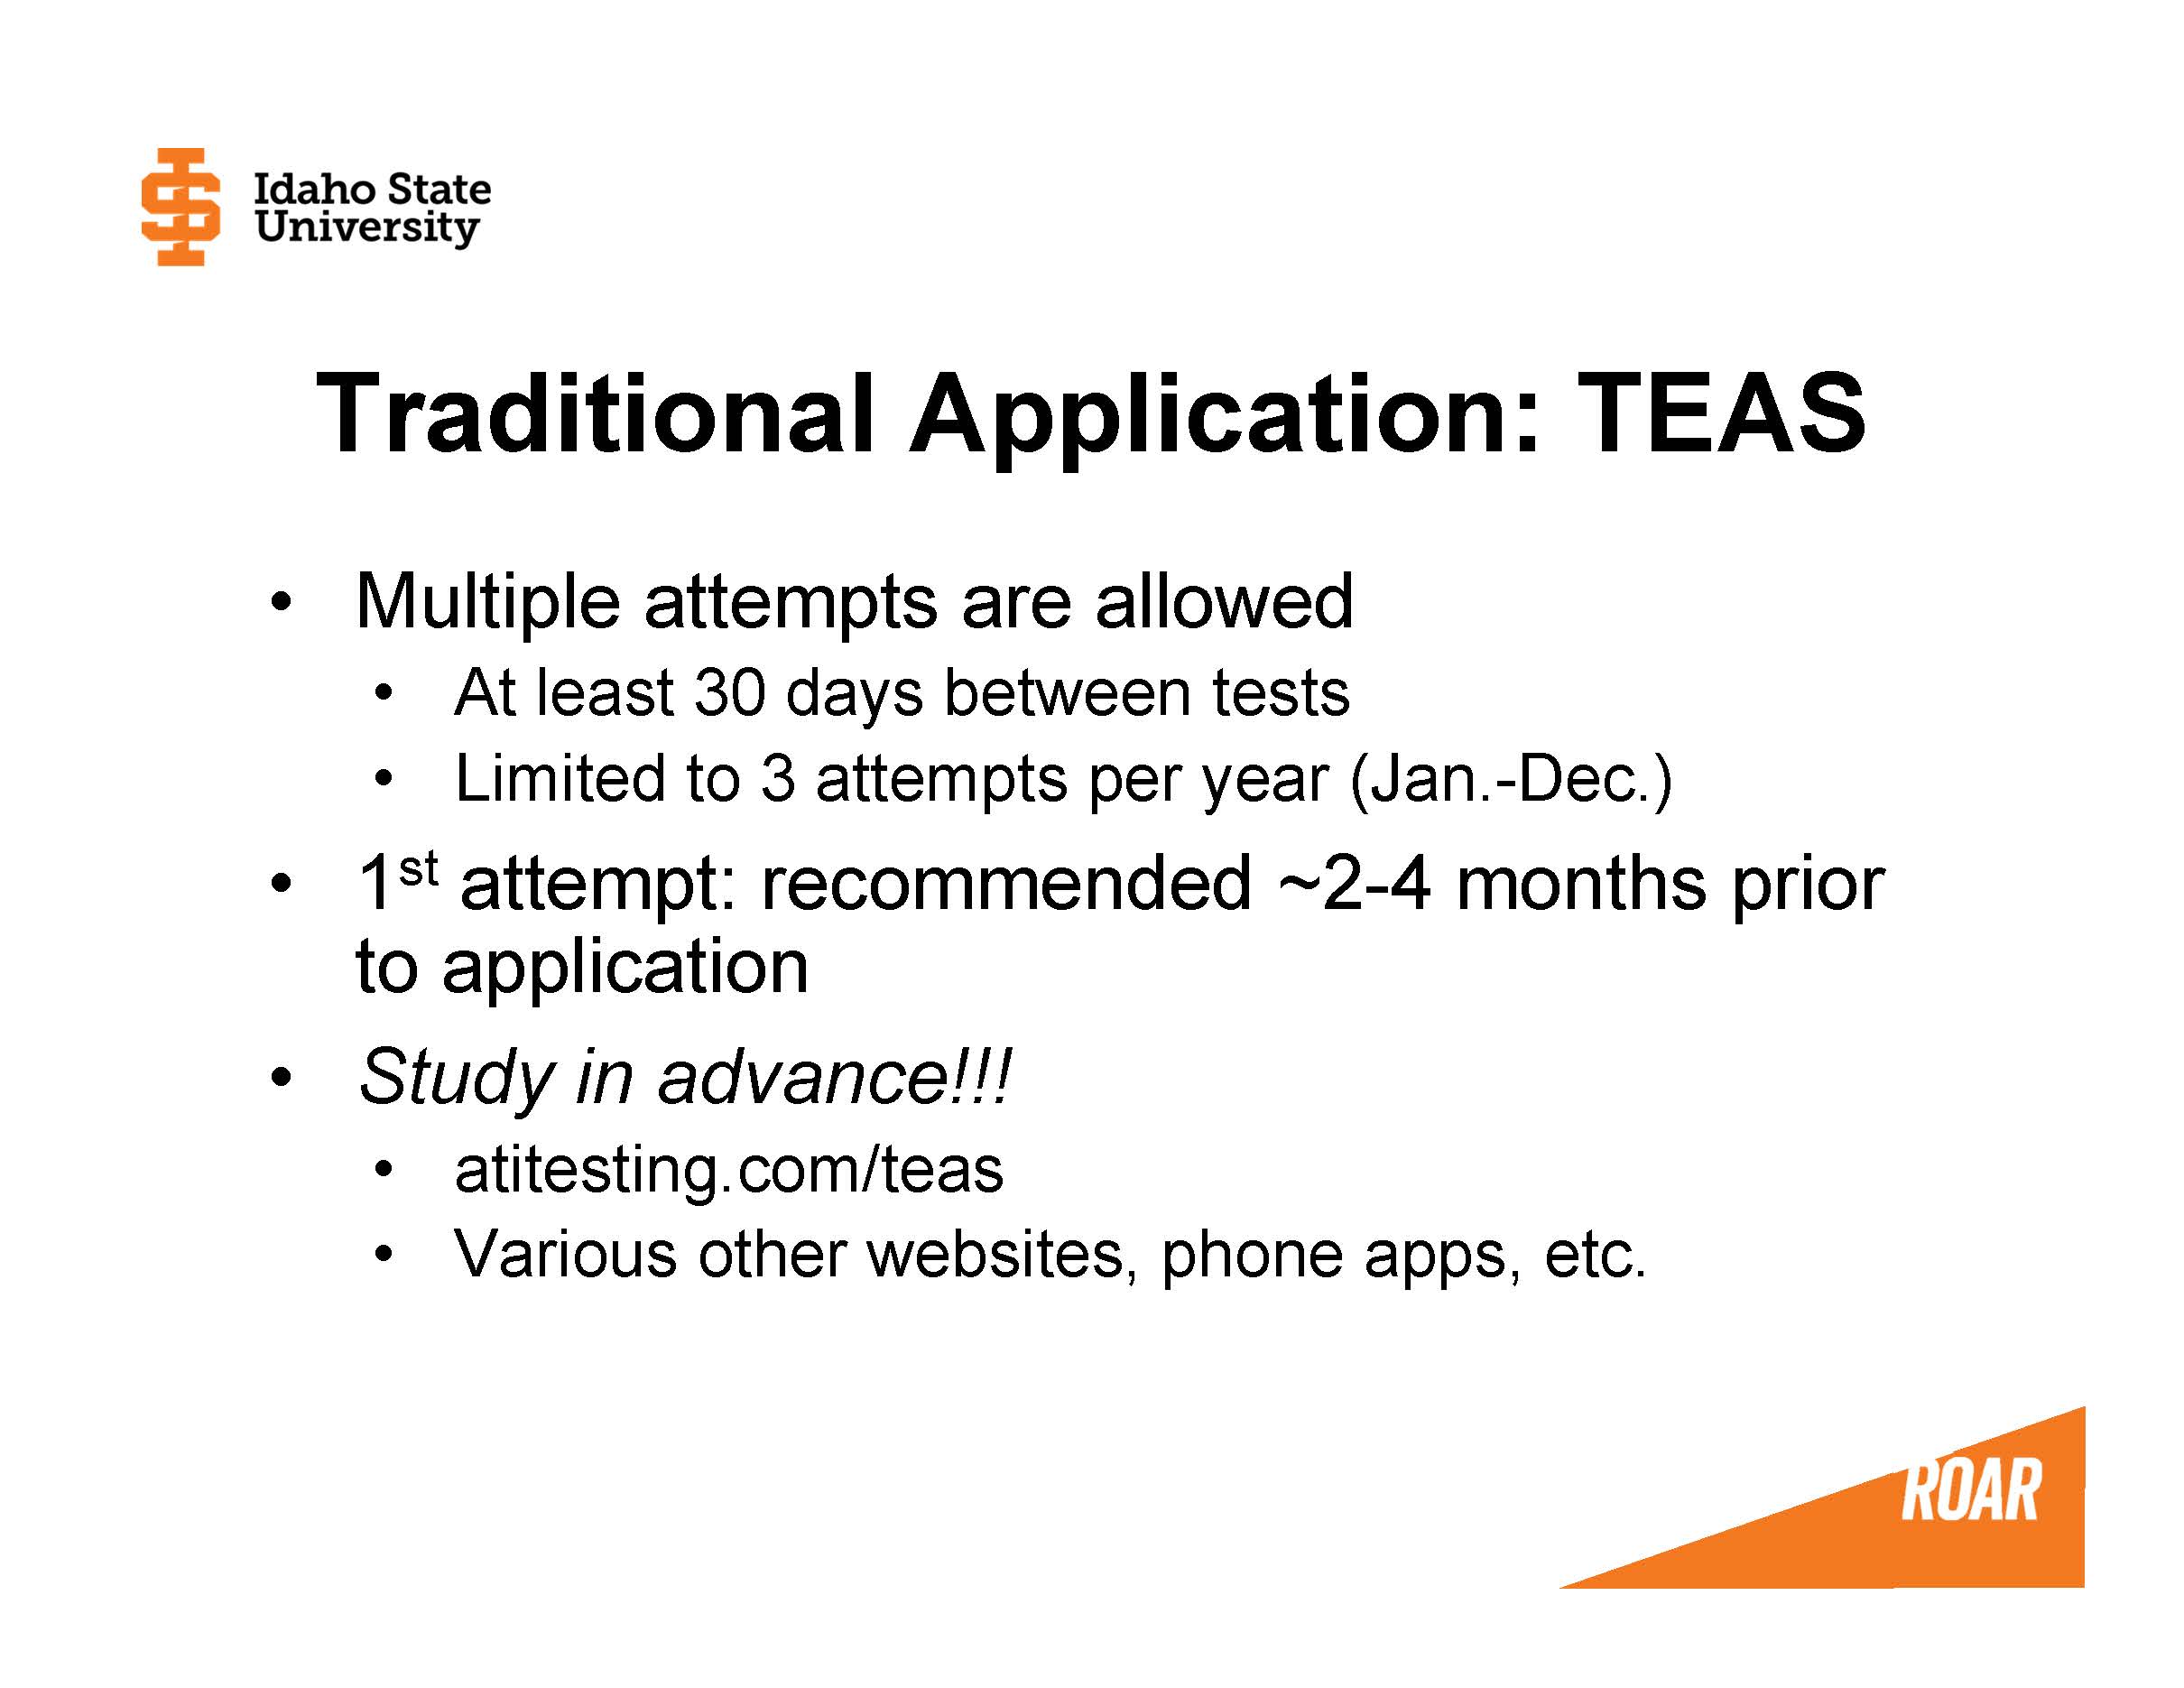 Multiple attempts are allowed At least 30 days between tests Limited to 3 attempts per year (Jan.-Dec.) 1st attempt: ~2-4 months prior to application Study in advance!!!  atitesting.com/teas Various other websites, phone apps, etc.